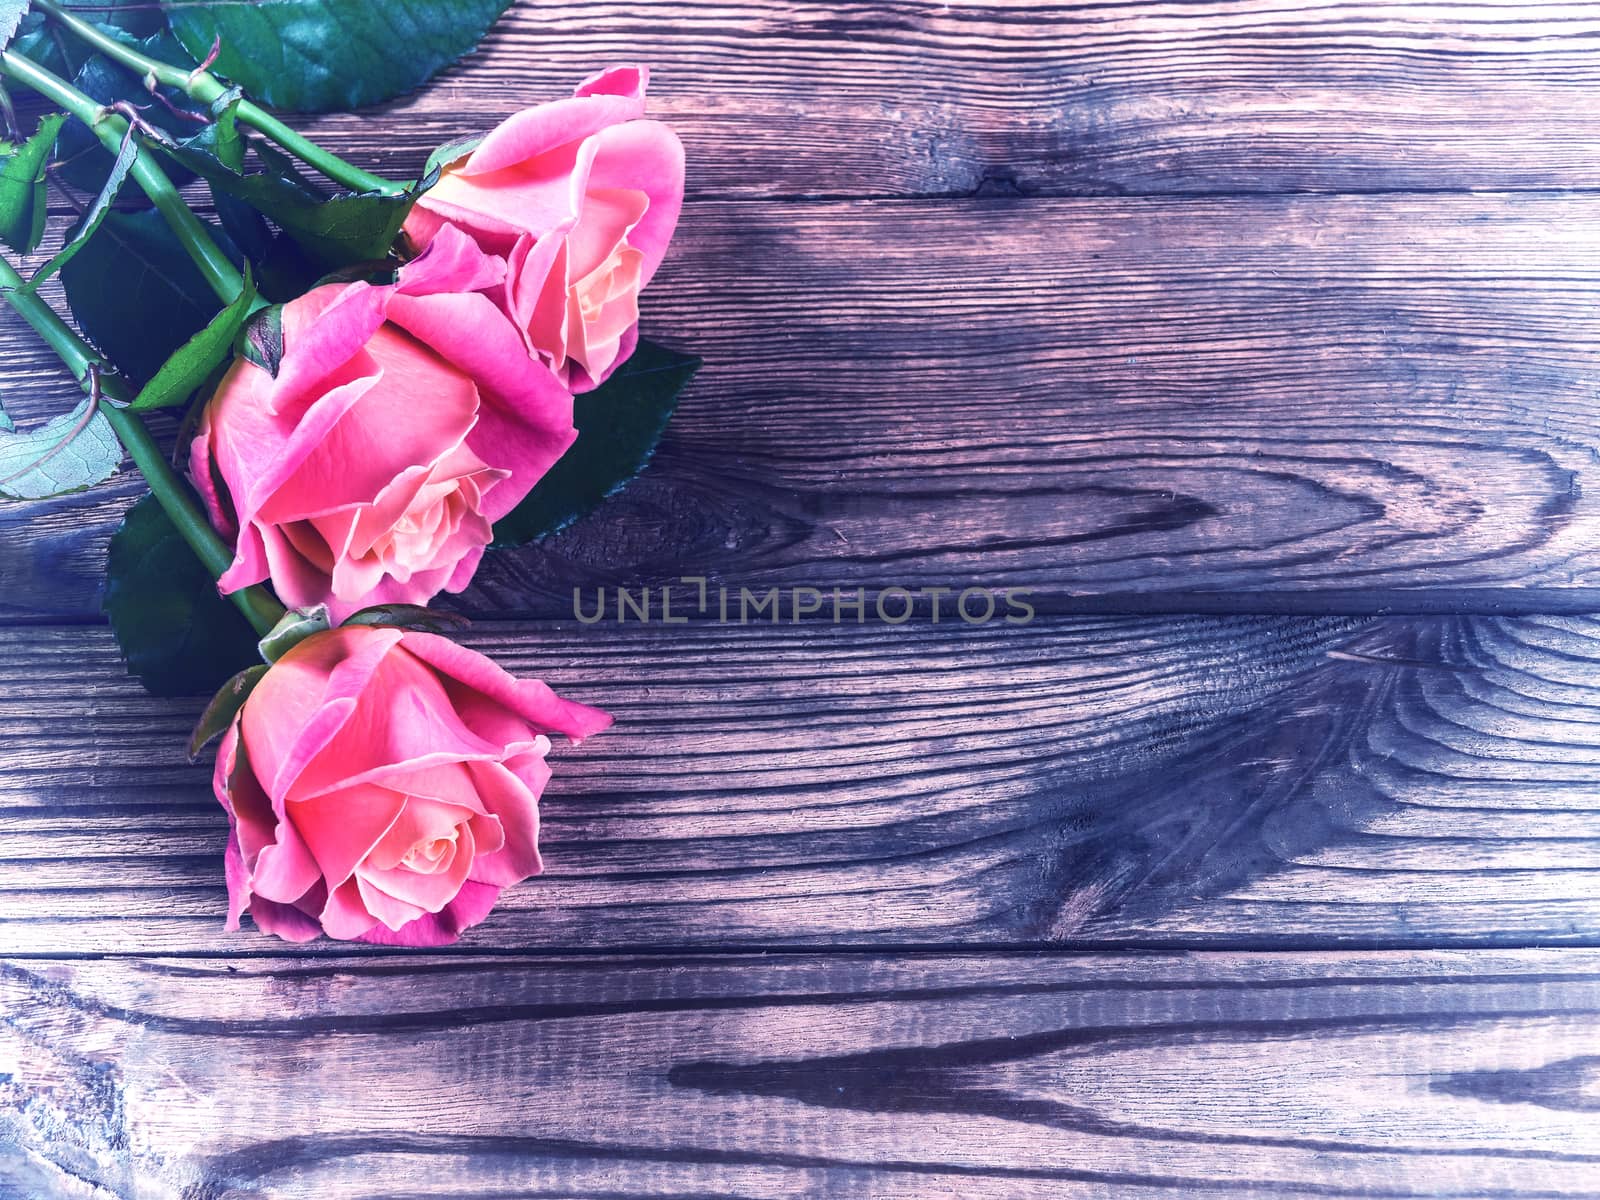 Vintage beautiful roses on wooden table, rustic style